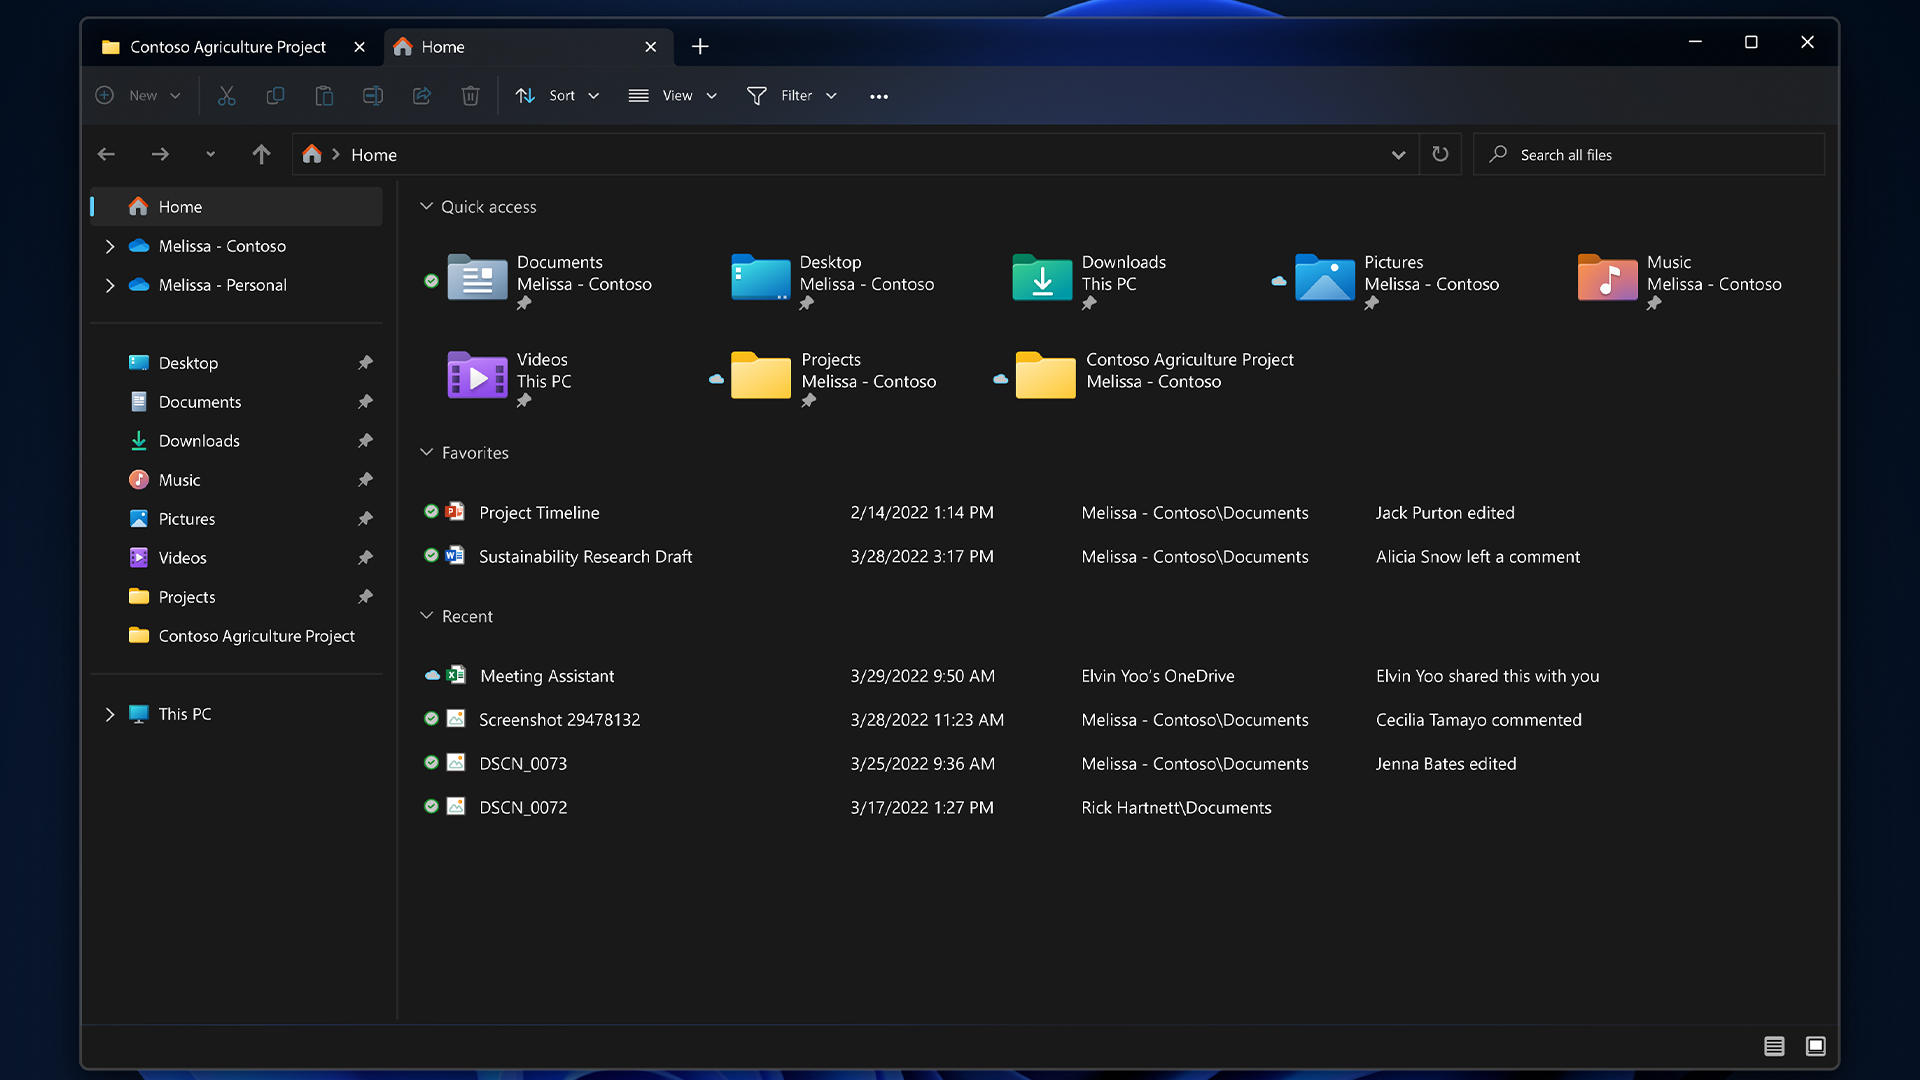 Tabs to File Explorer and more finally arrive in new Windows 11 2022 update